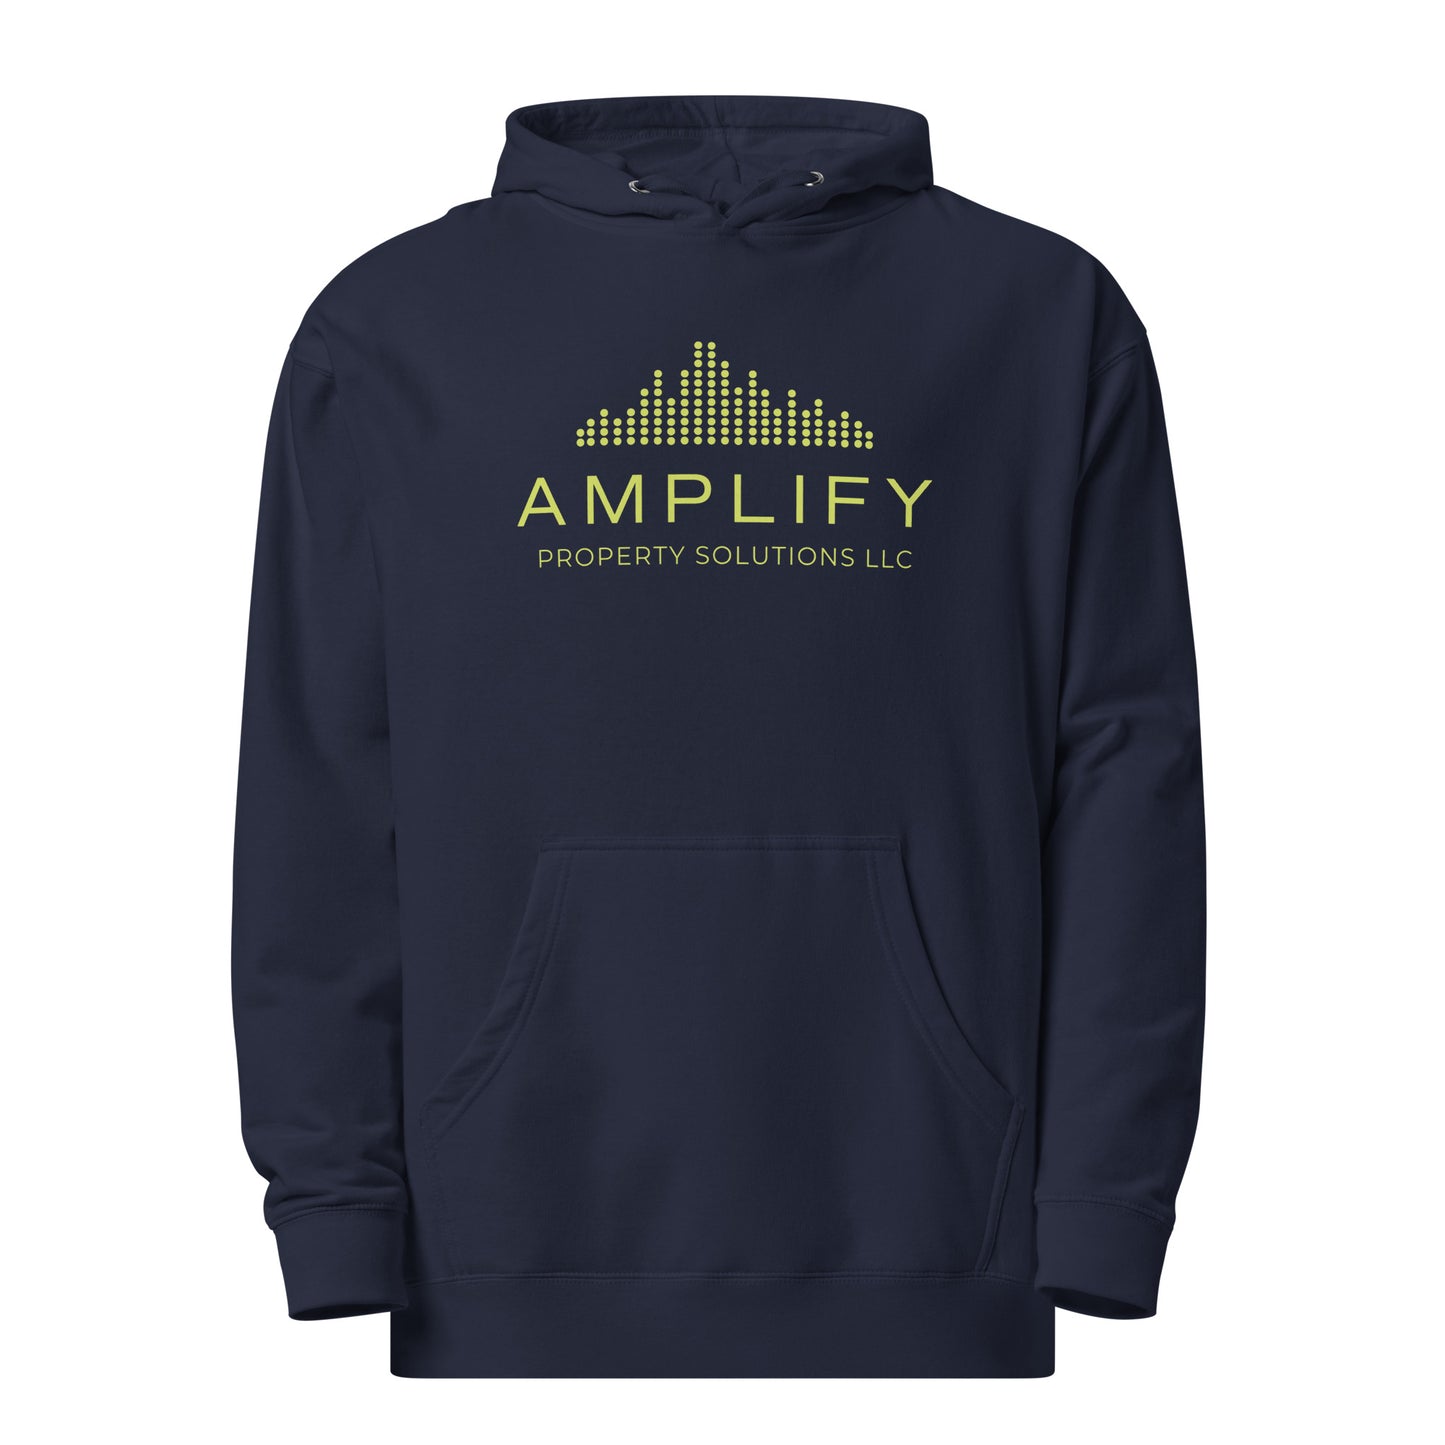 Amplify Property Solutions | Unisex midweight hoodie